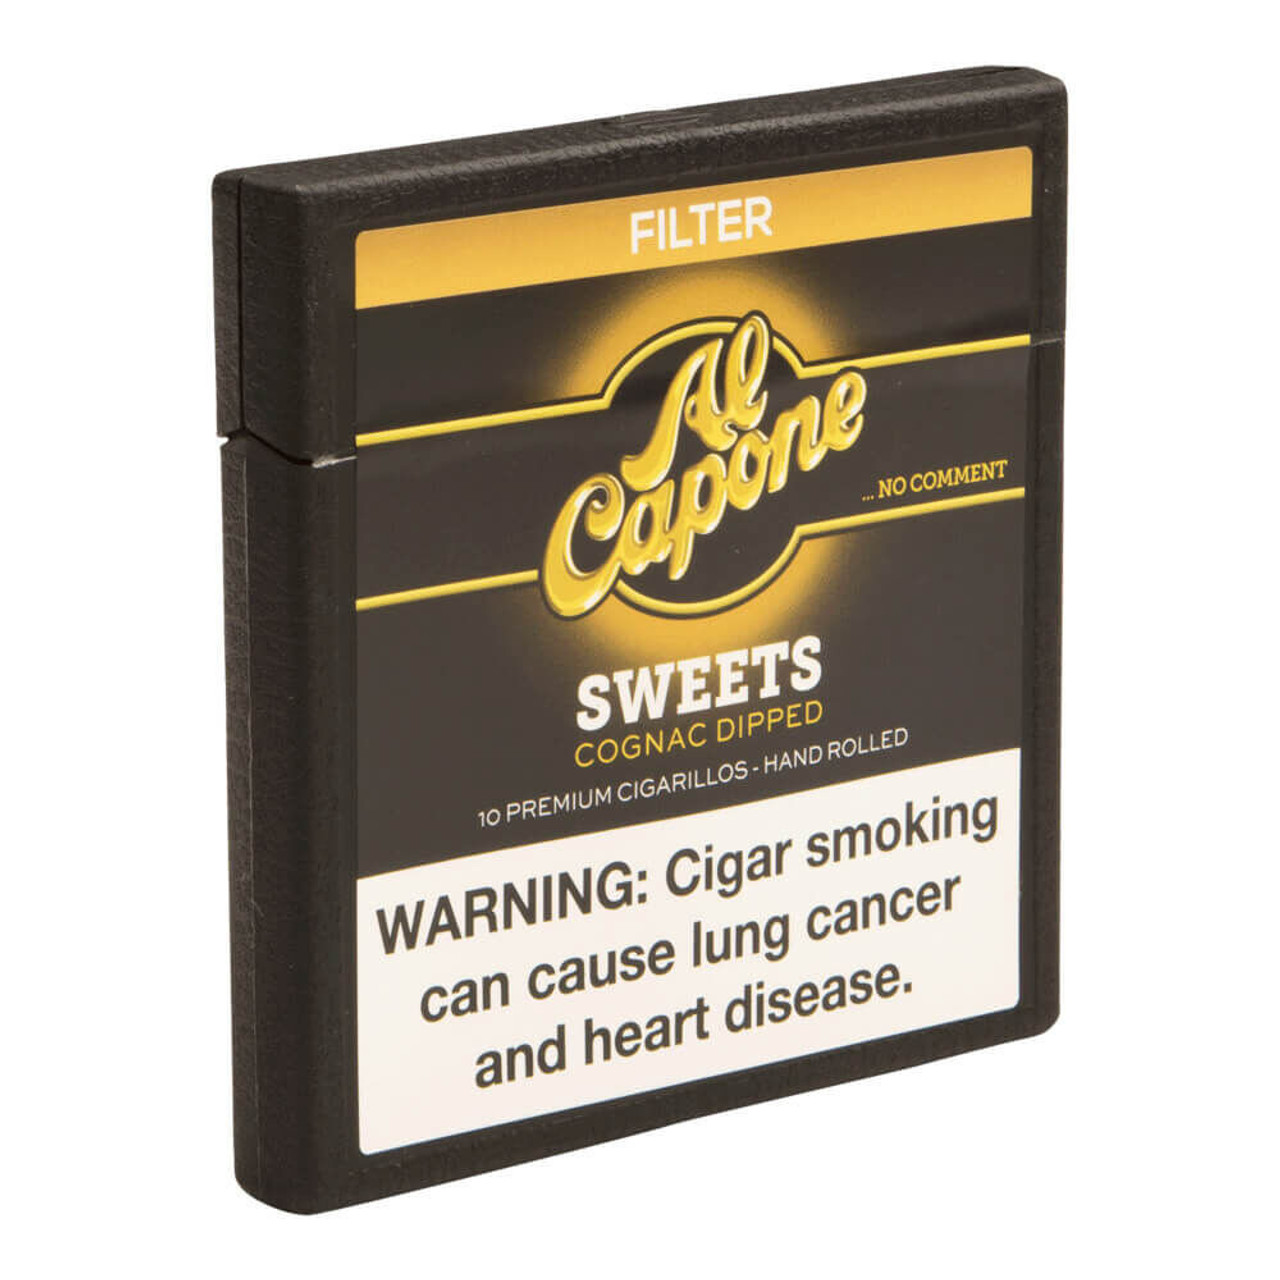 Al Capone Filter Sweets Cigars Single Pack